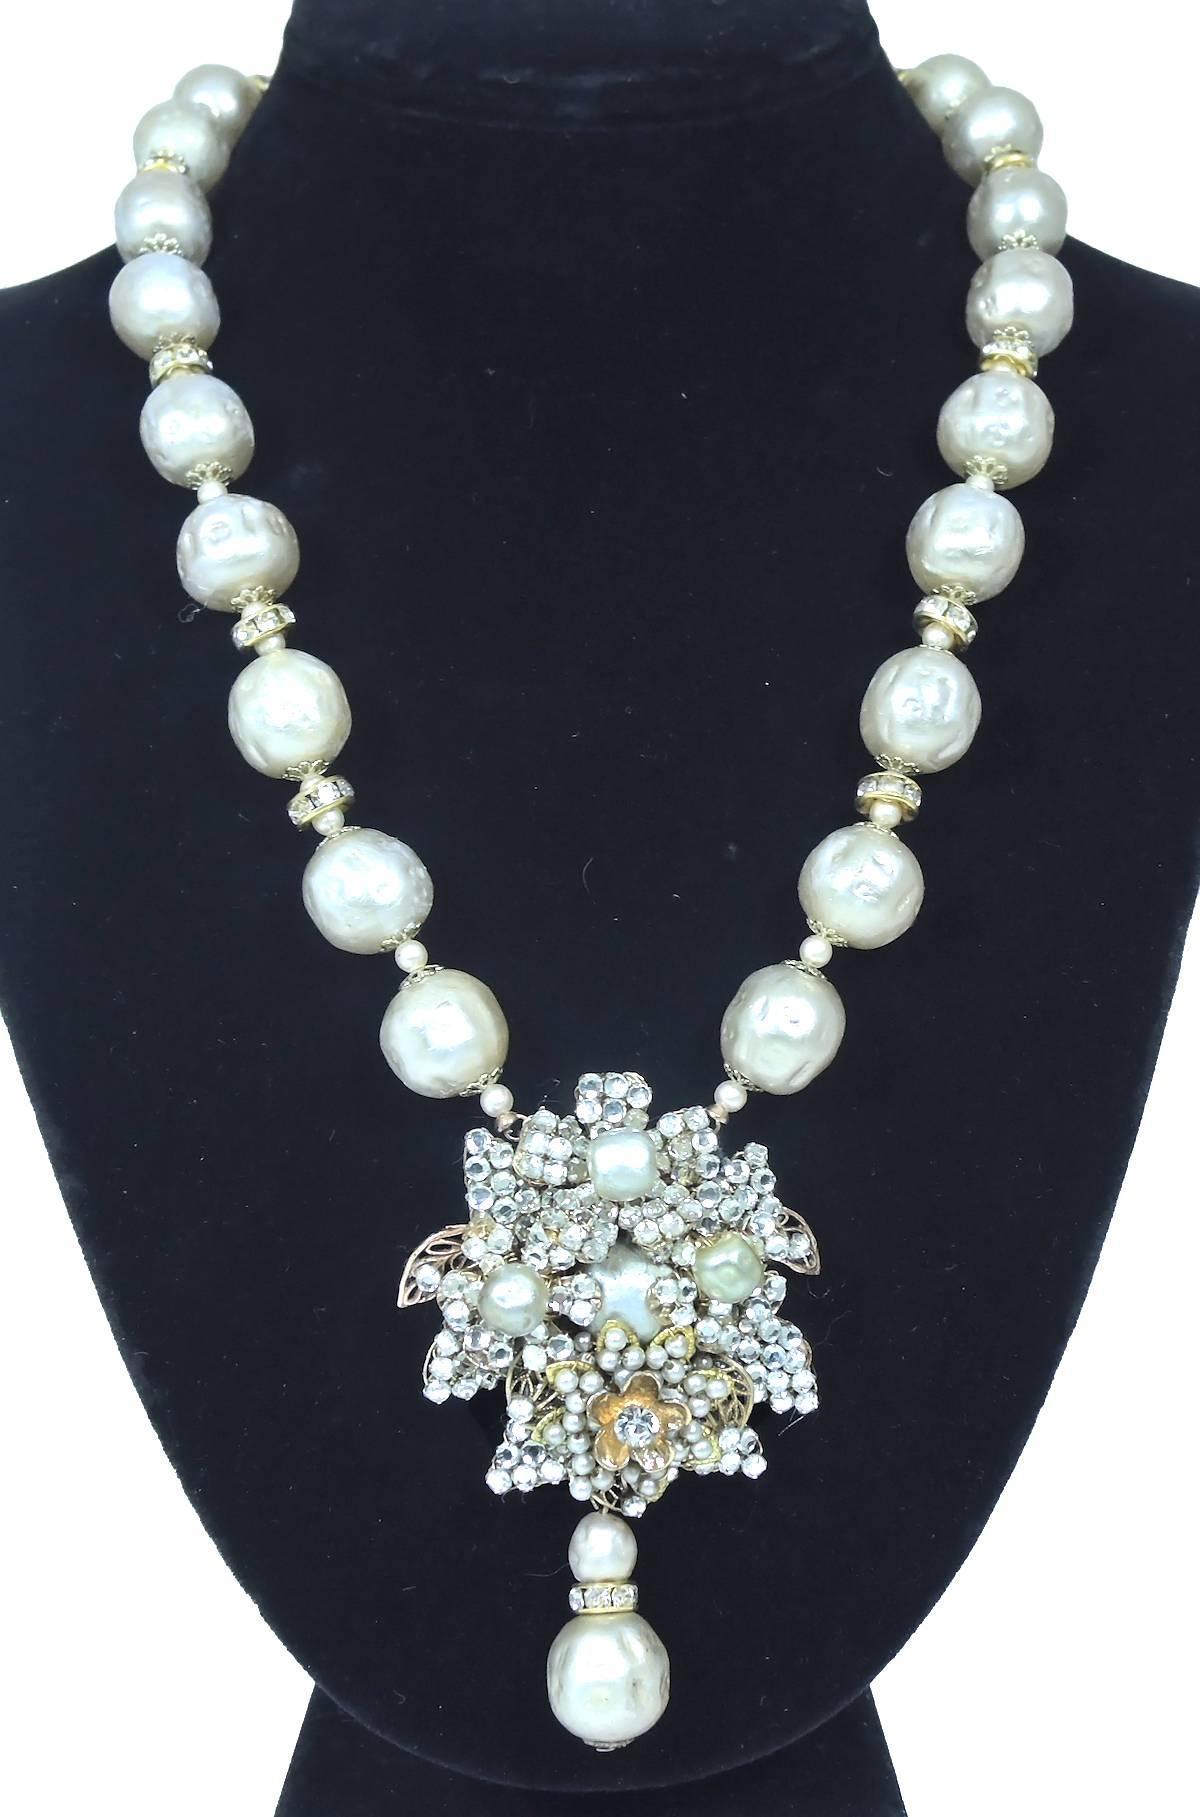 This is a vintage 1950s Miriam Haskell Necklace is made with large faux baroque pearls and rondell spacers. The necklace leads down to a gorgeous floral centerpiece that is embellished with rose montee stones. It has a large faux pearl in the center